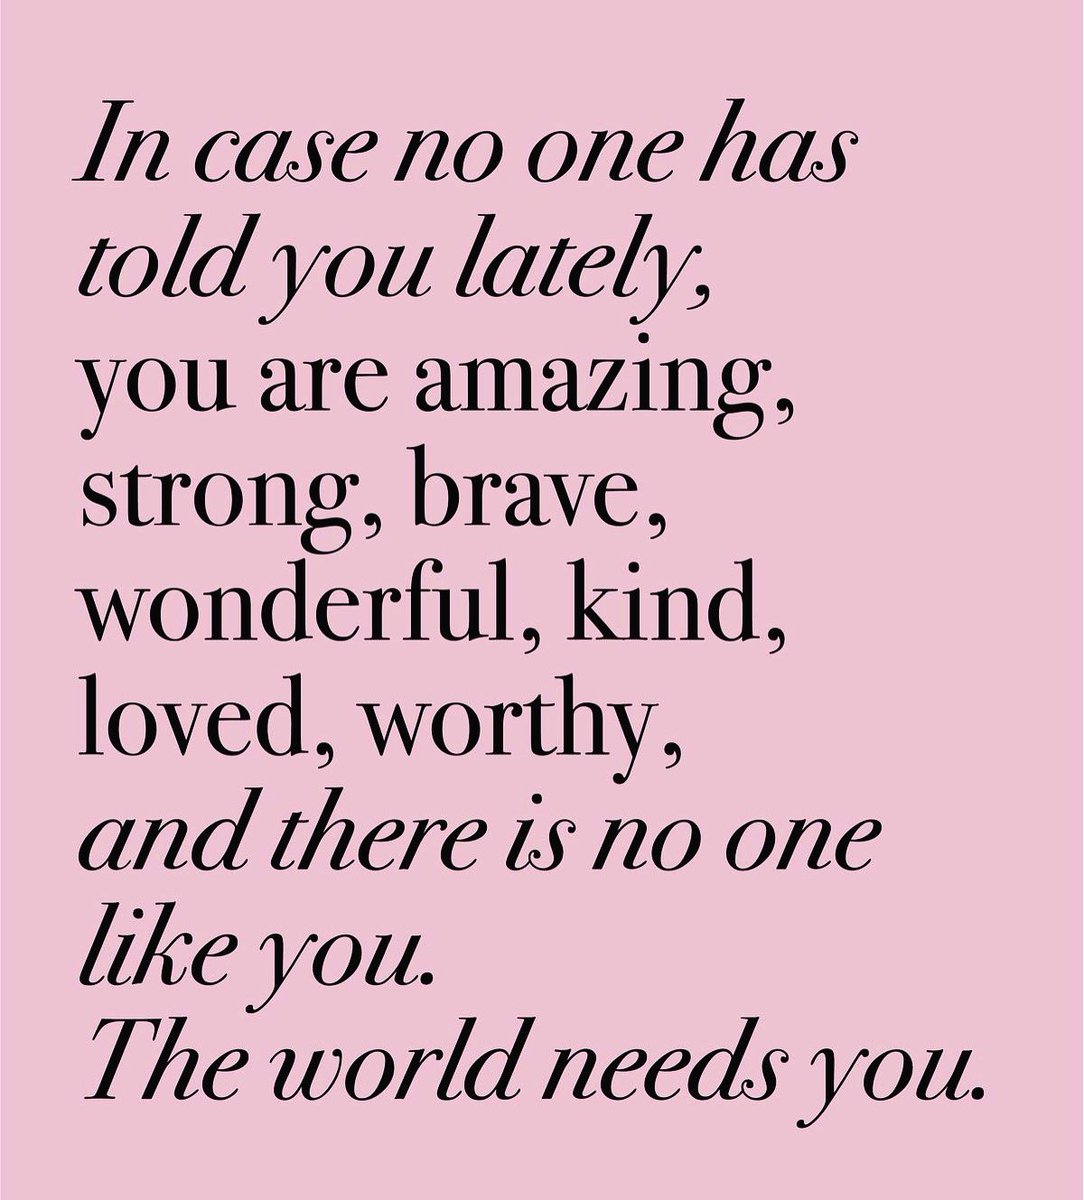 You are!! #Amazing #Worthy #Perfect #SelfLove #SelfBelief #Strong #Brave #Loved #Kind xxx